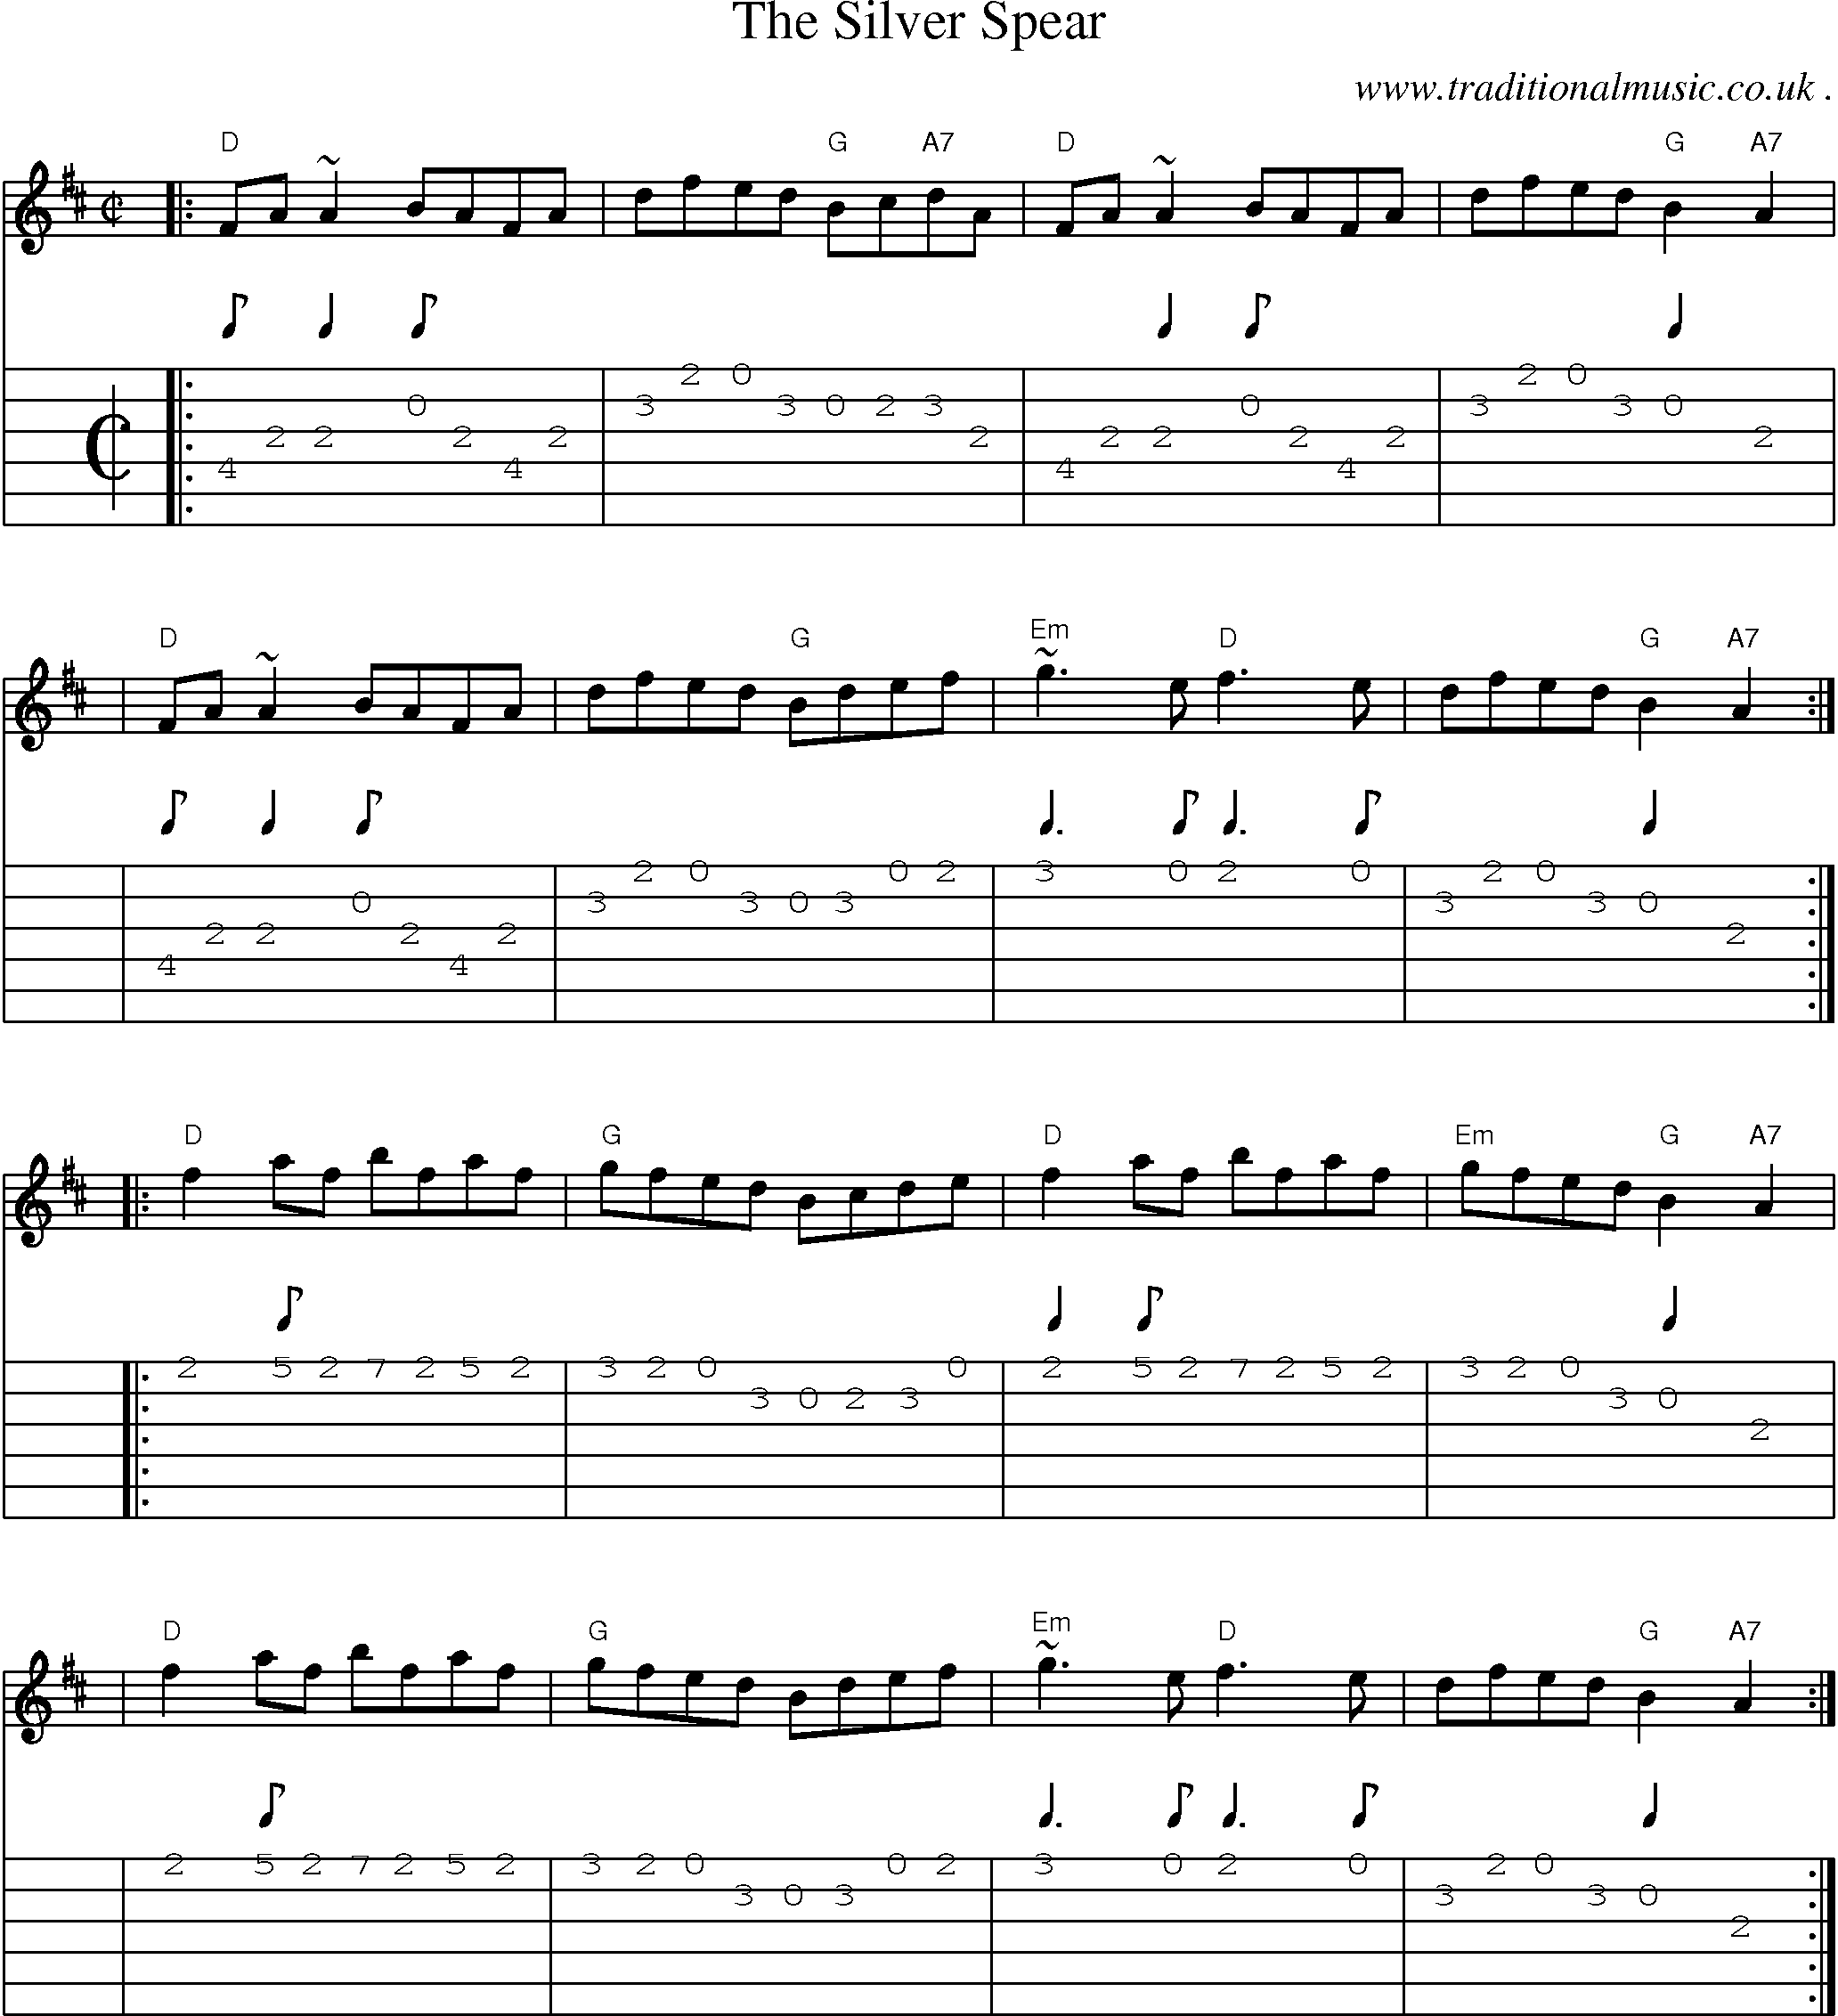 Sheet-music  score, Chords and Guitar Tabs for The Silver Spear